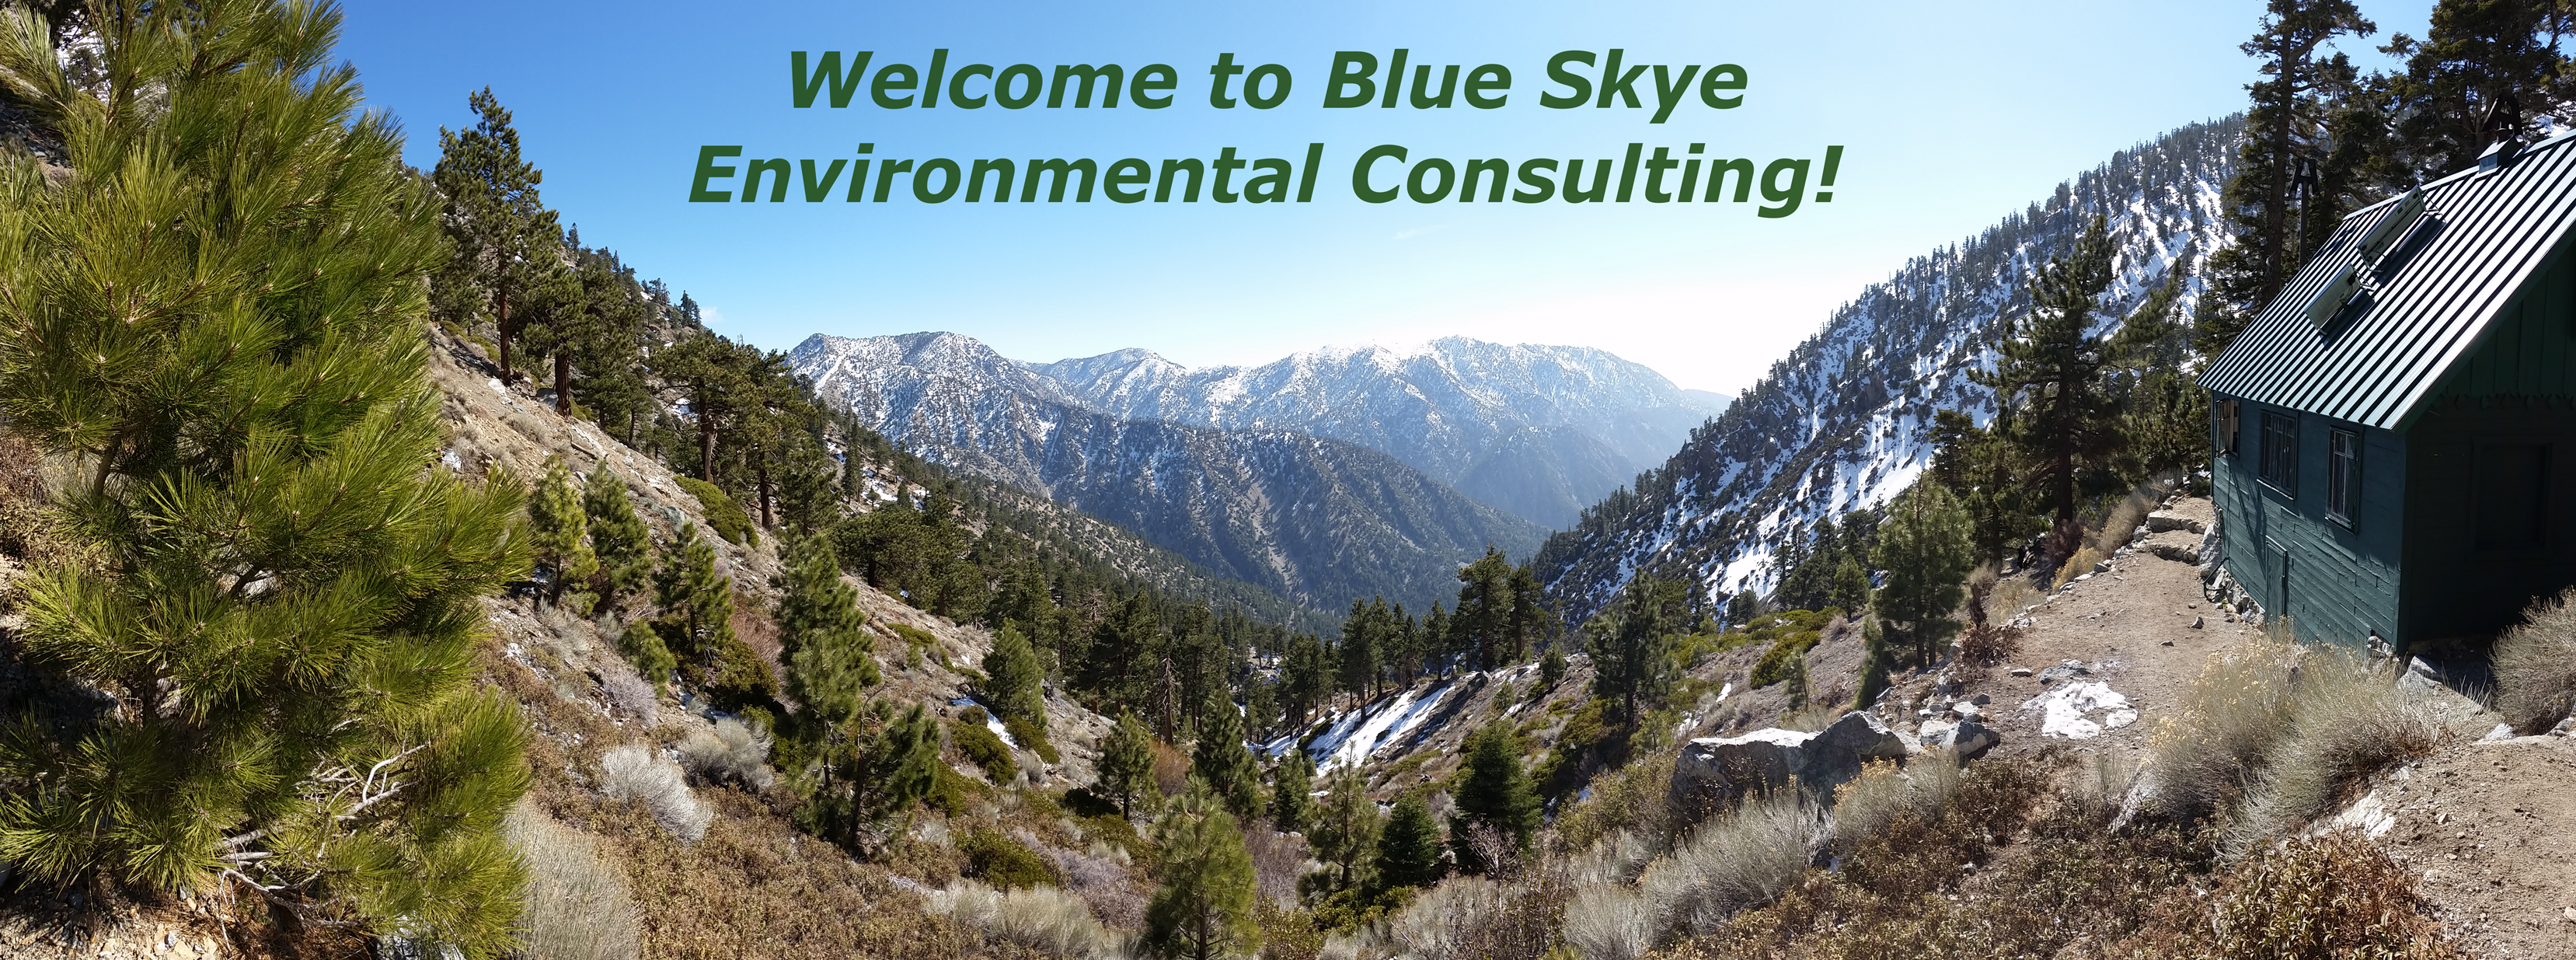 Welcome to Blue Skye Environmental Consulting